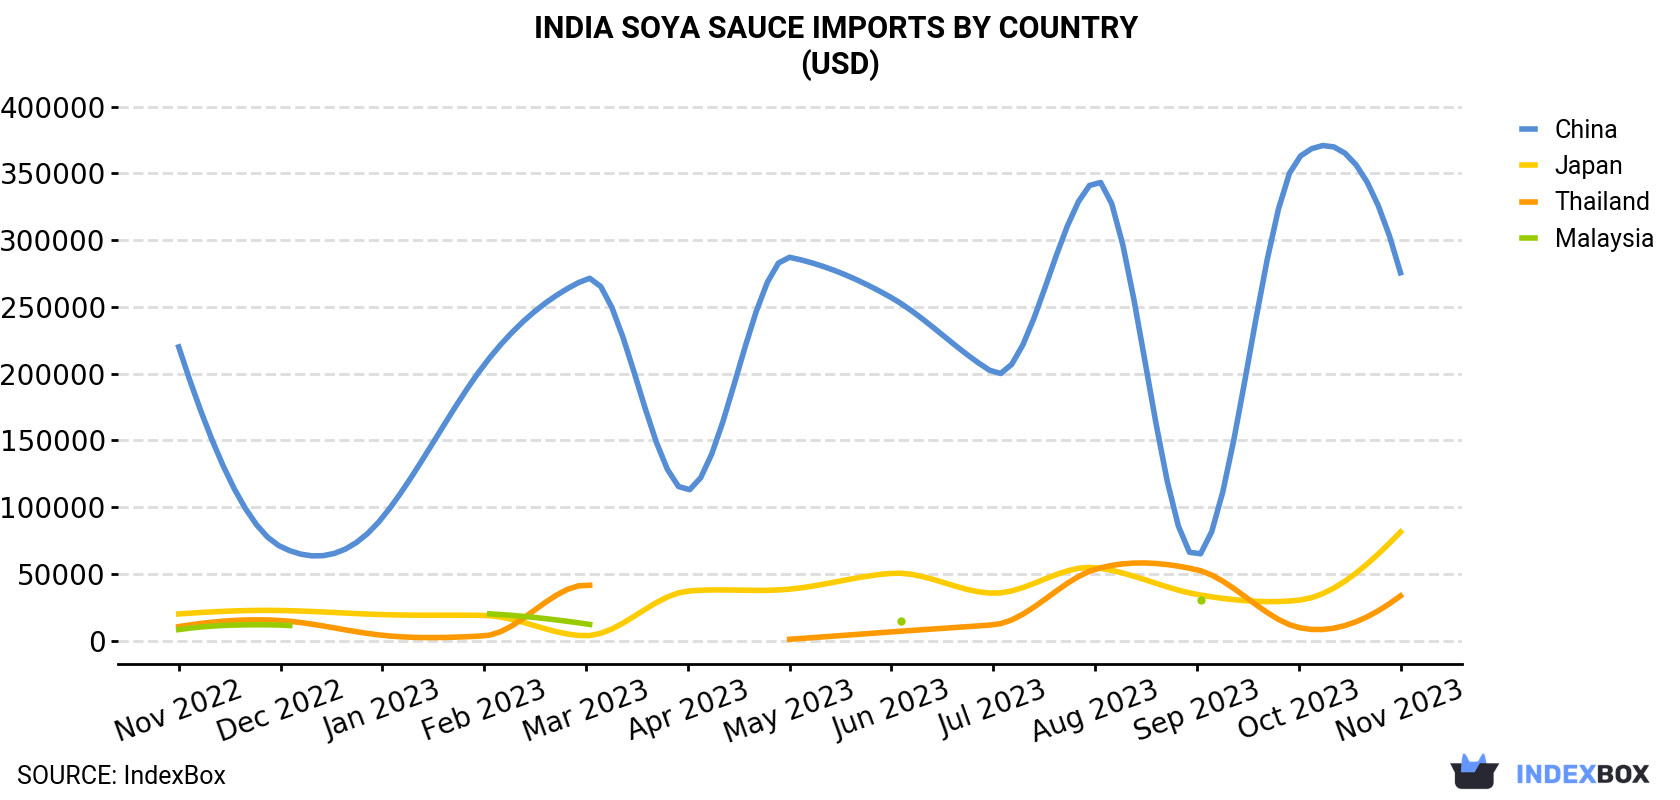 India Soya Sauce Imports By Country (USD)